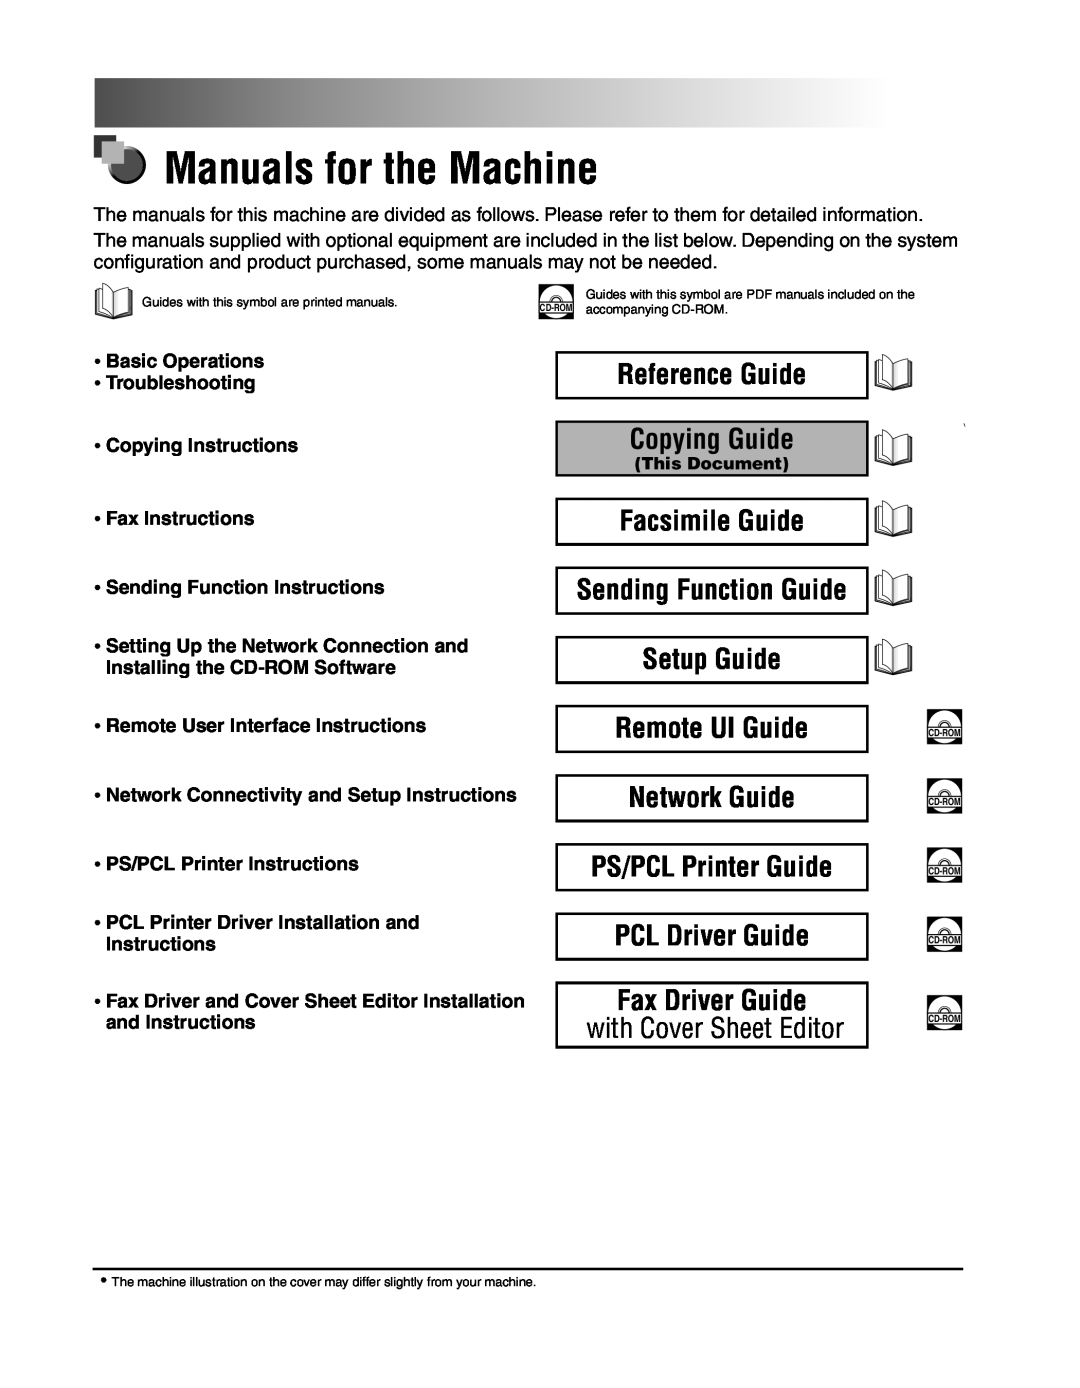 Canon 2010F Manuals for the Machine, Basic Operations Troubleshooting Copying Instructions, PS/PCL Printer Instructions 